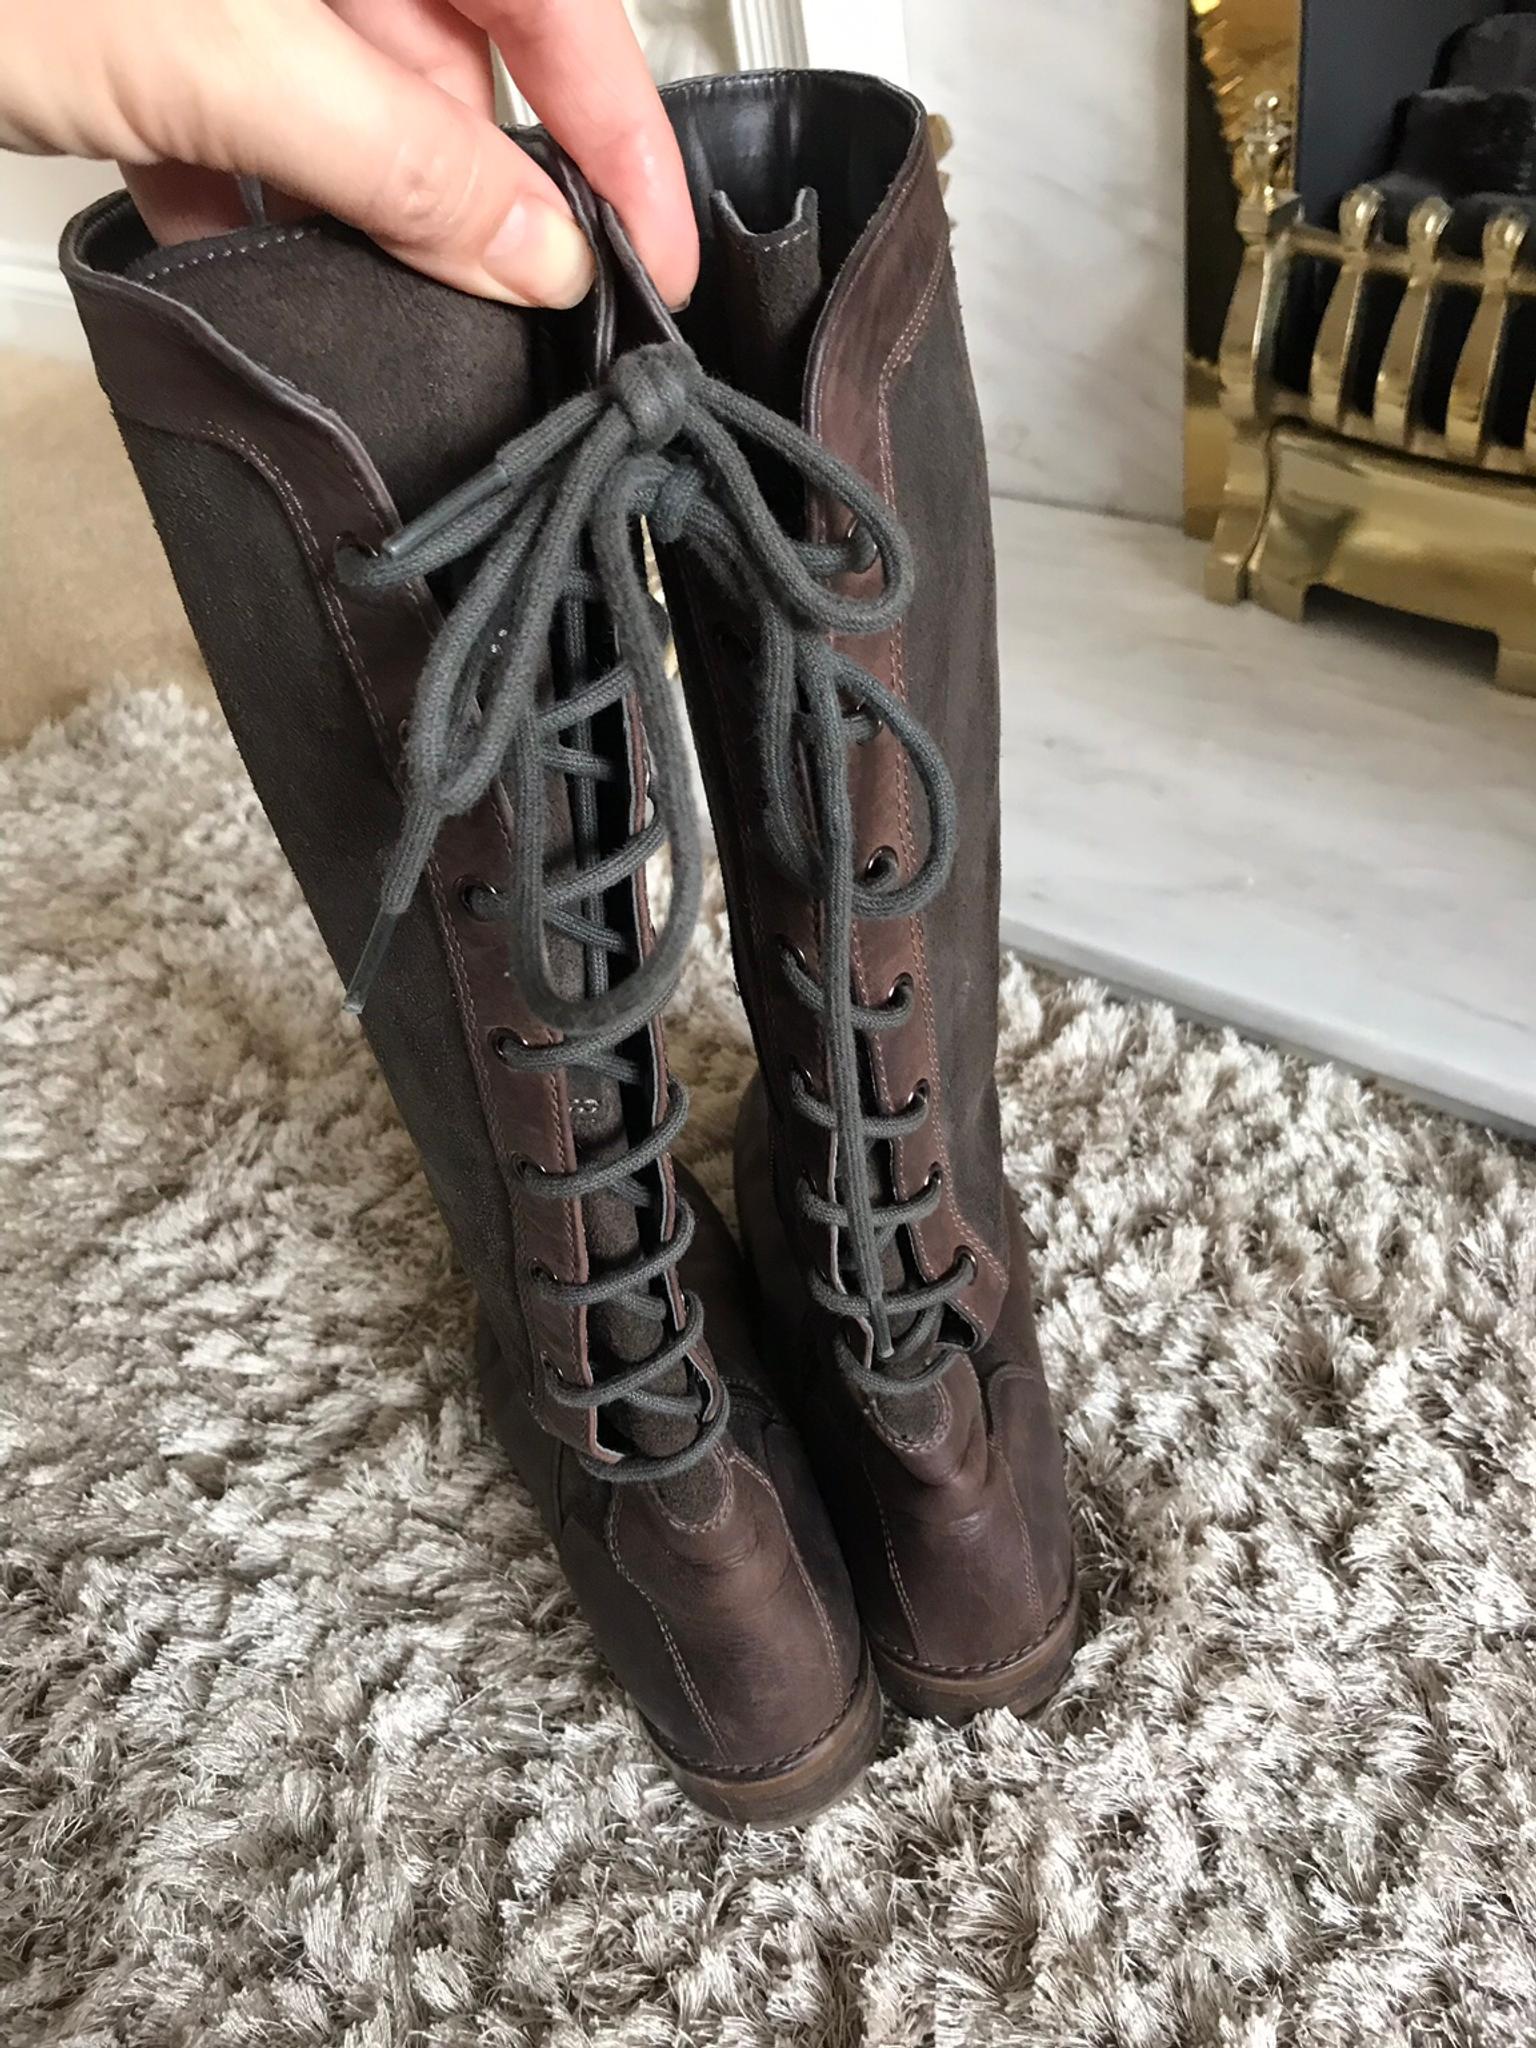 clarks size 5 boots